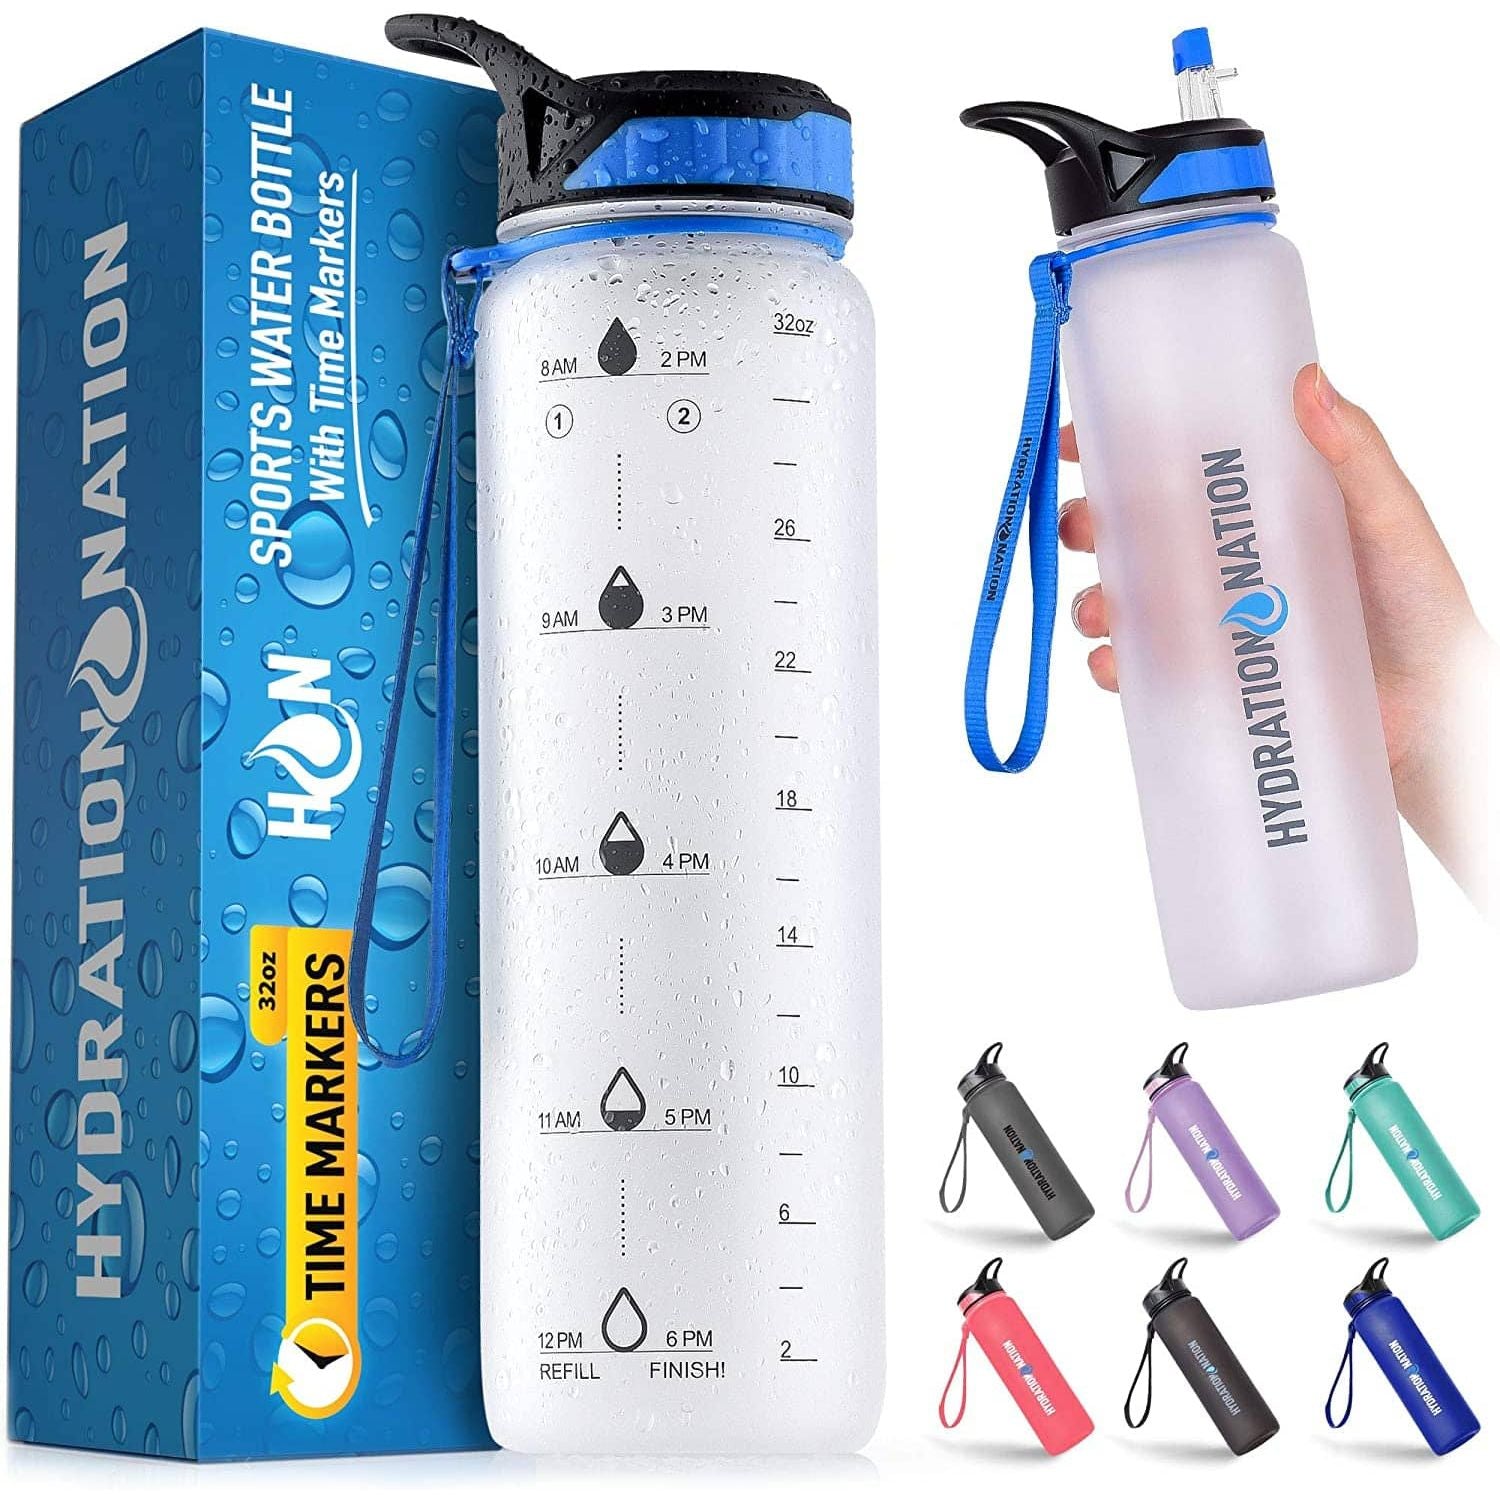 Zulay Hydration Nation Water Bottle with Time Marker 32 oz in Black